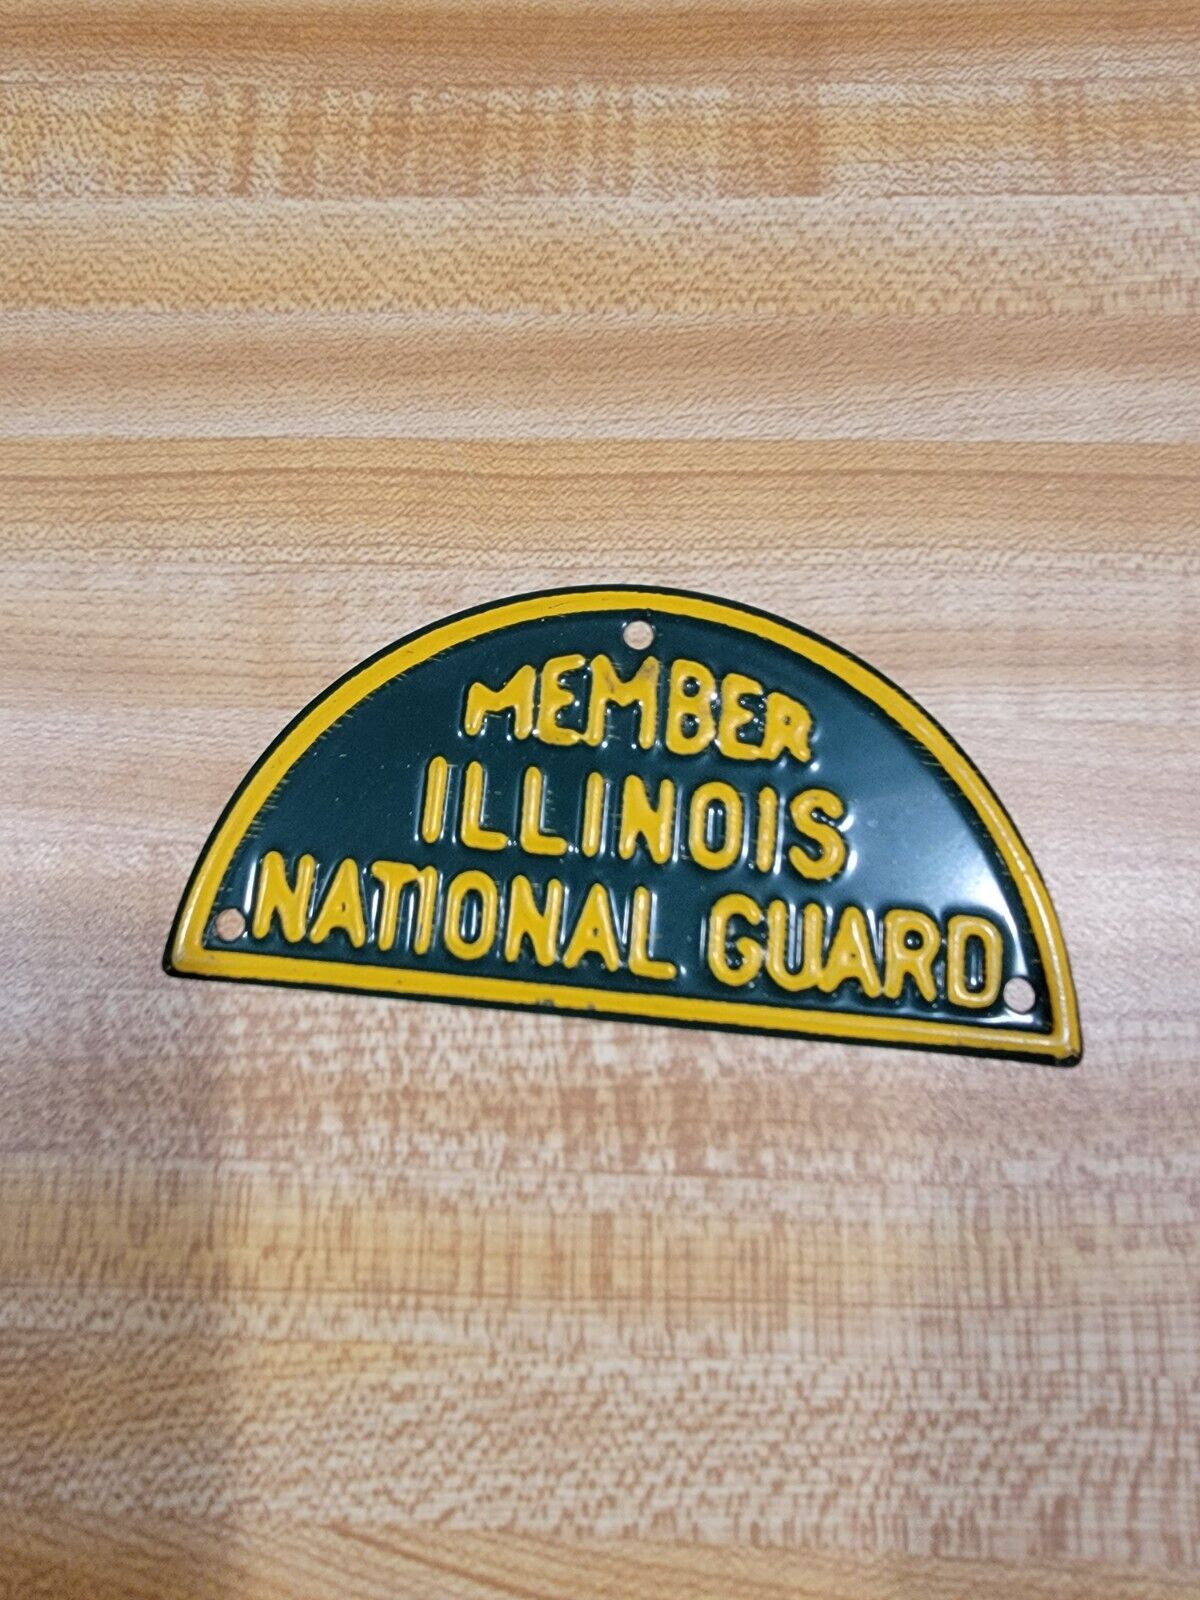 1950s 1960s ILLINOIS NATIONAL GUARD STEEL LICENSE PLATE TOPPER AUTO BICYCLE